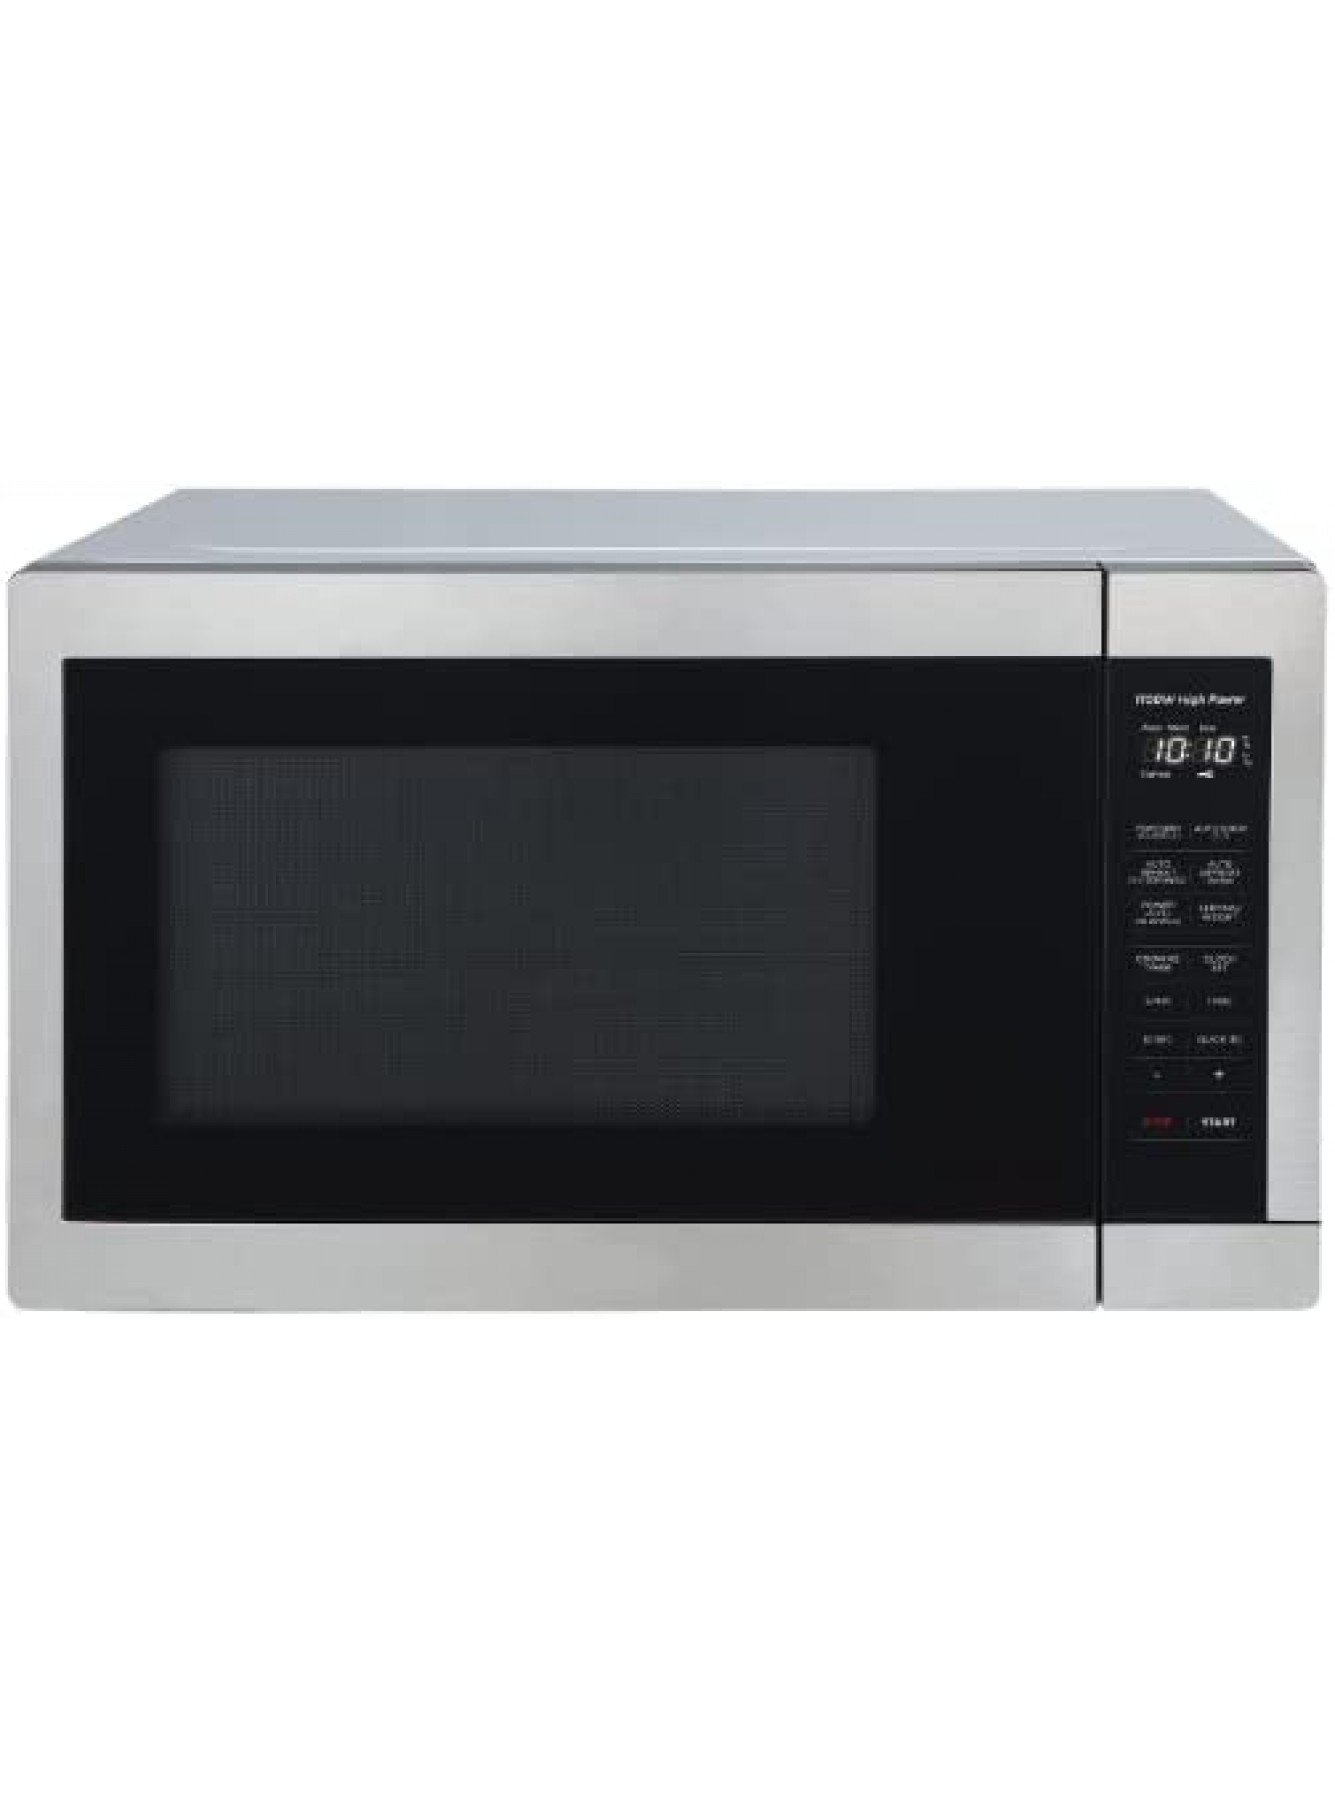 1.3 cu. ft. 1100W Countertop Microwave Oven with Easy Clean Interior B09ZTCXHC2